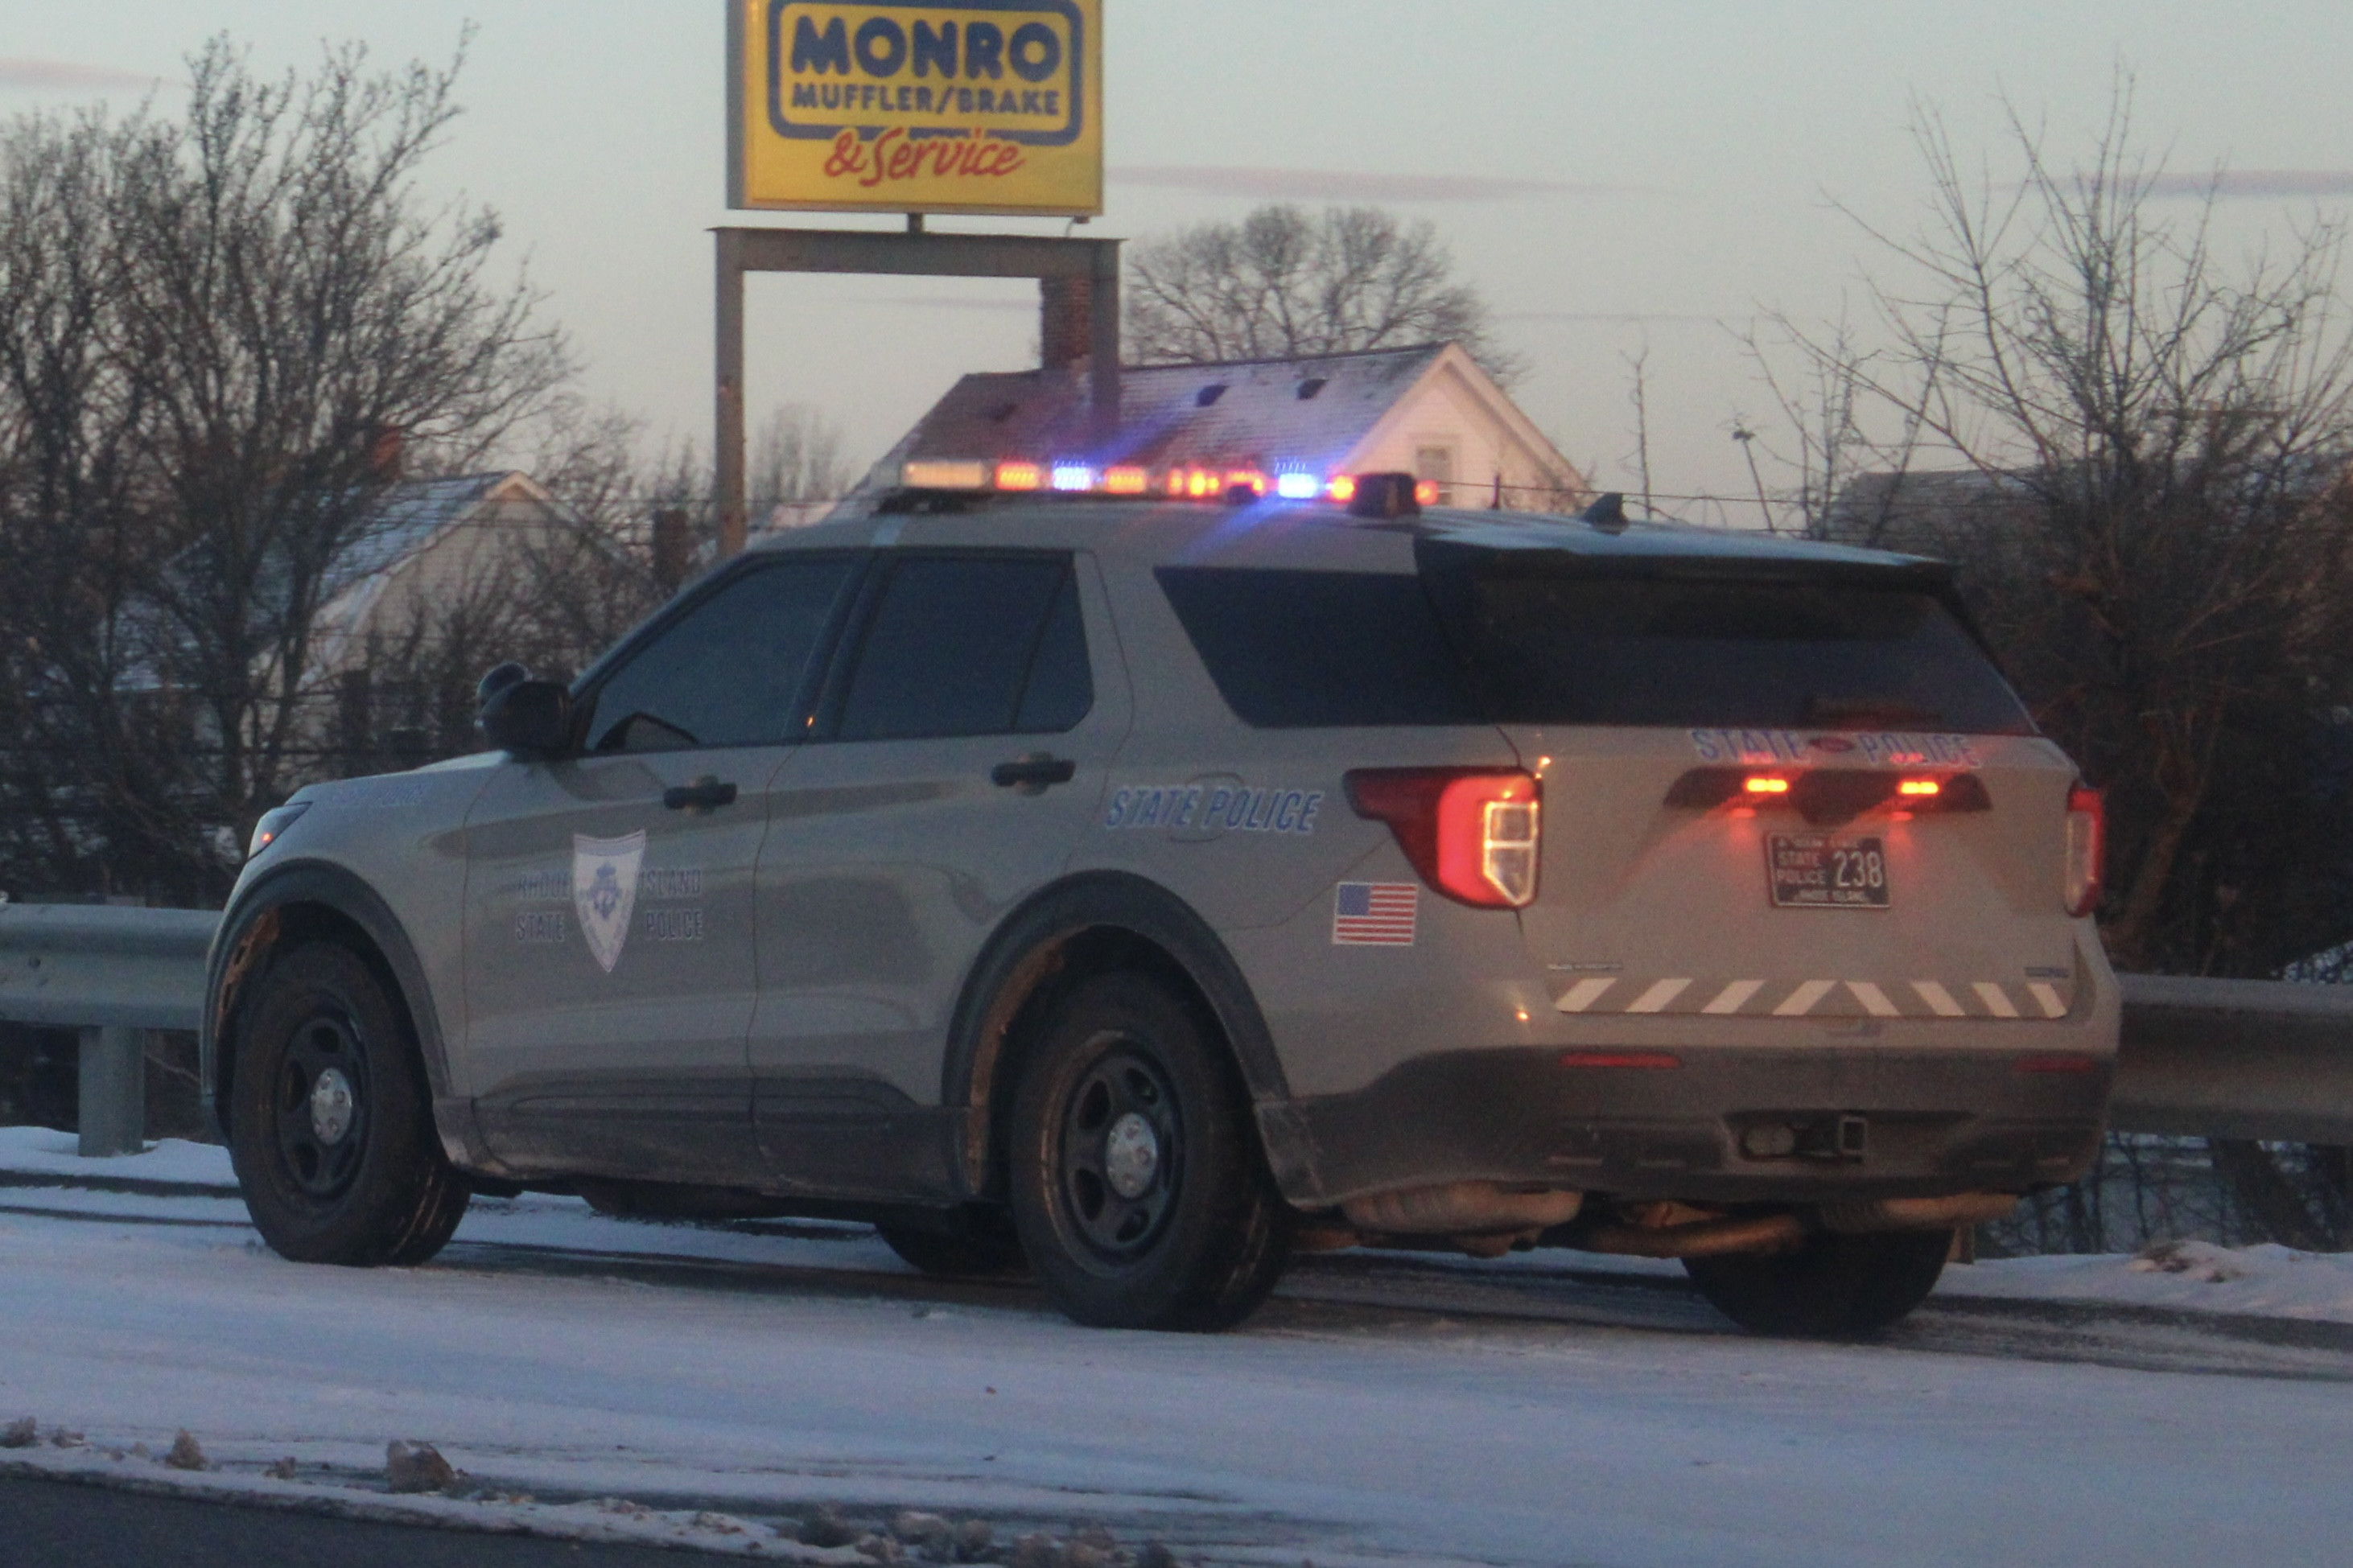 A photo  of Rhode Island State Police
            Cruiser 238, a 2022 Ford Police Interceptor Utility             taken by @riemergencyvehicles